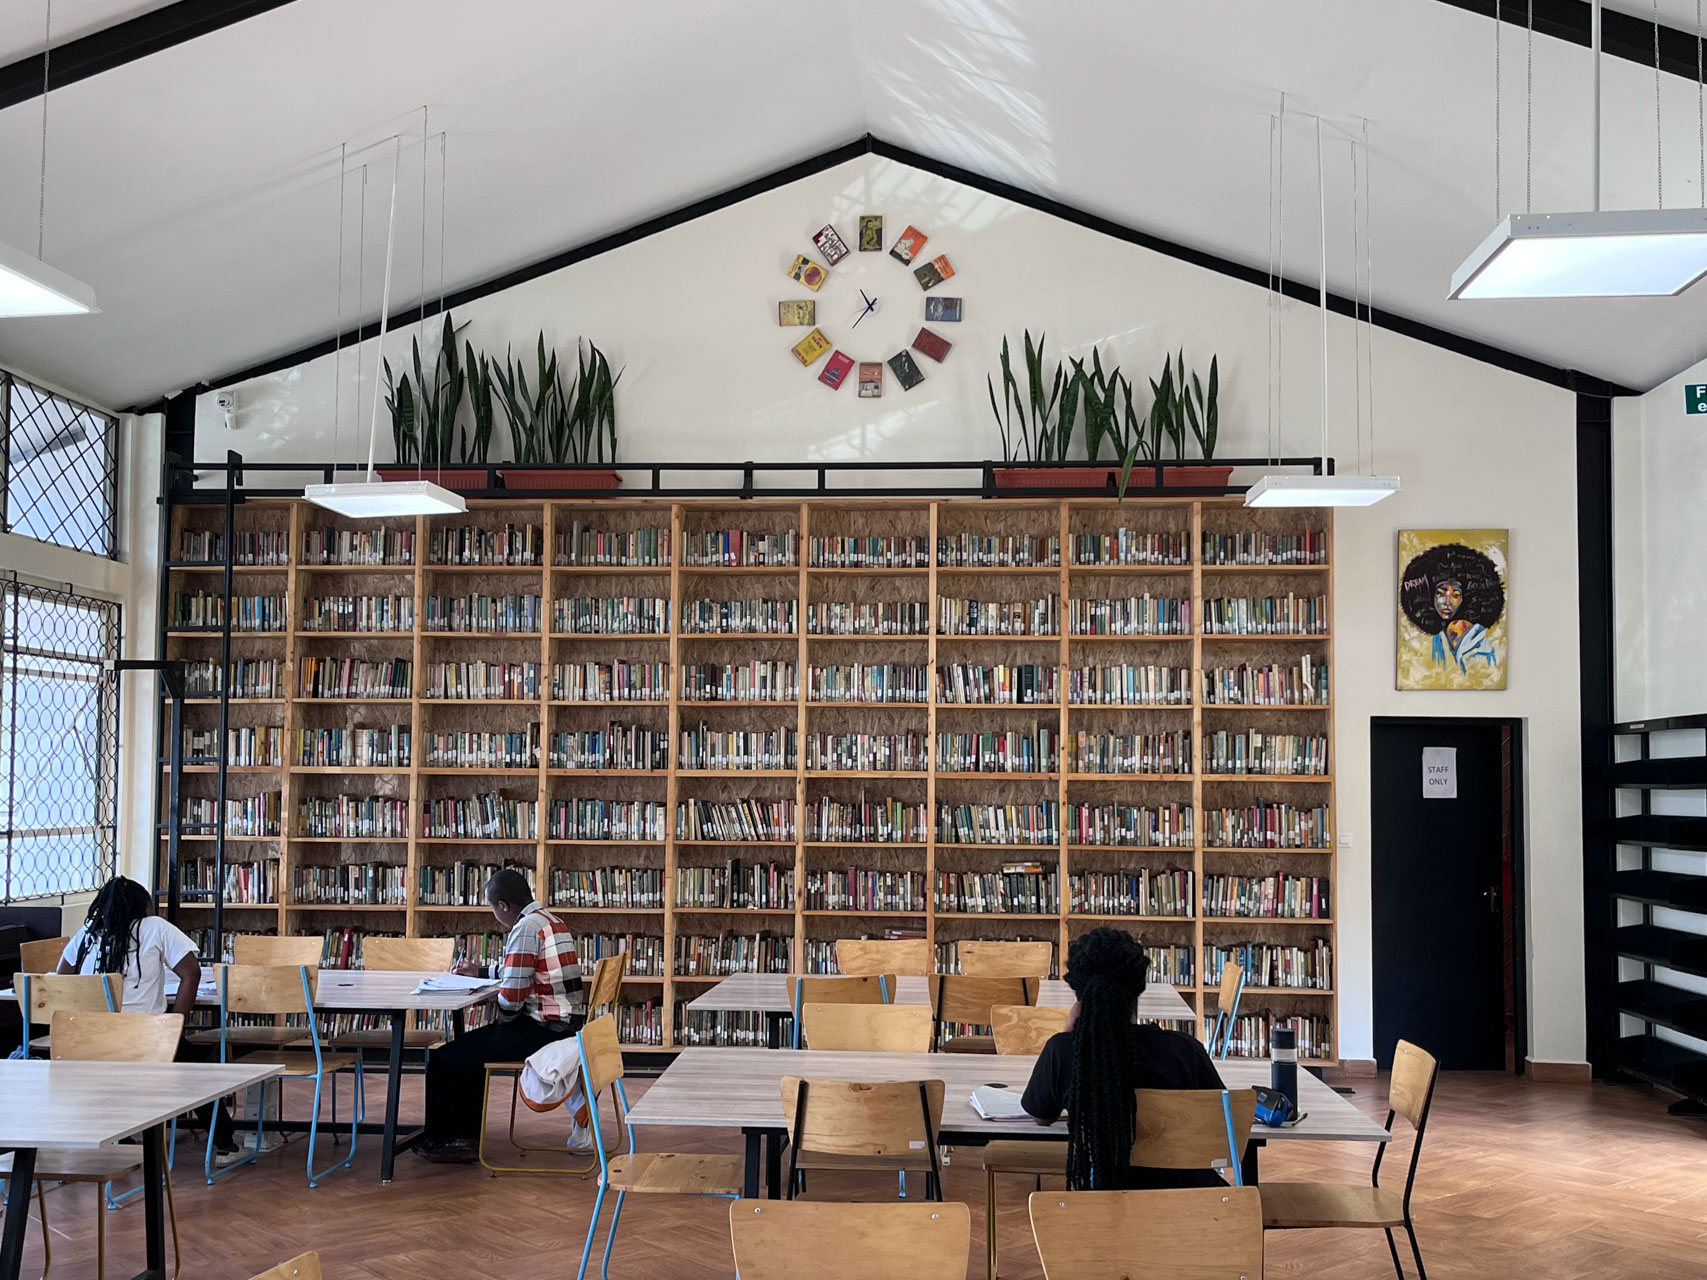 Fun art, creative design and some greenery has brought this library back to life